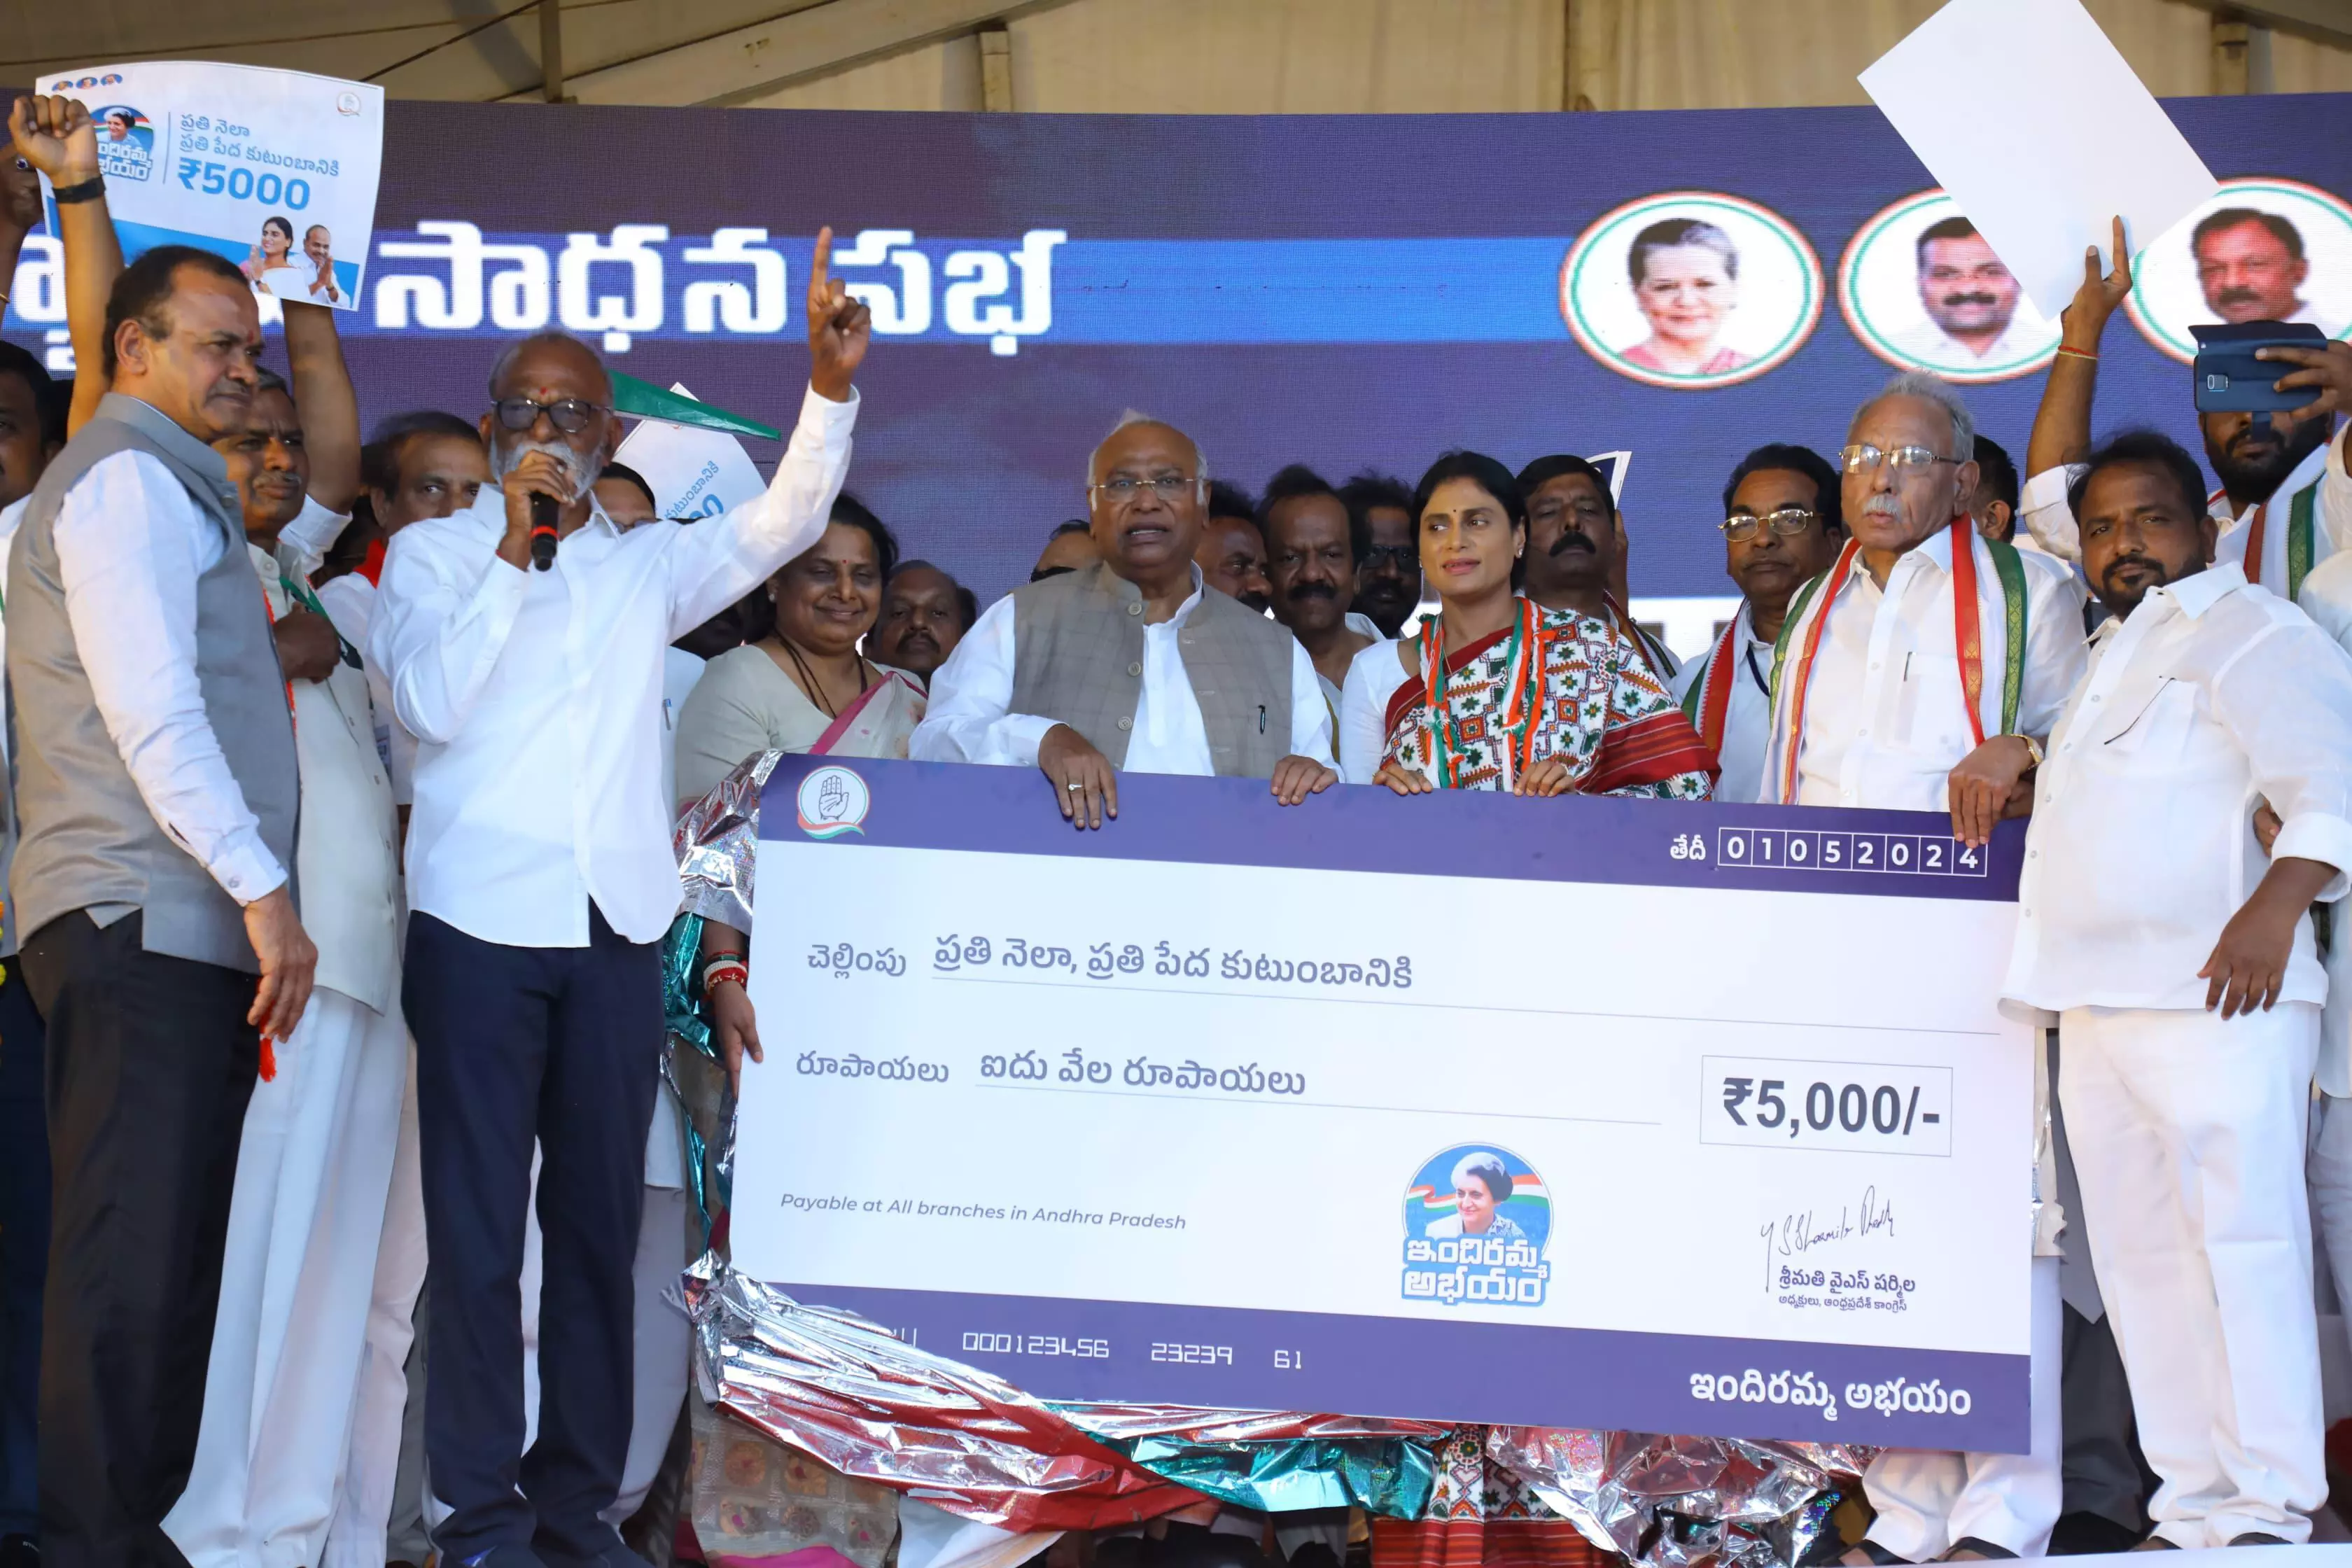 Congress promises Rs 5,000 for poor every month if voted to power in Andhra Pradesh